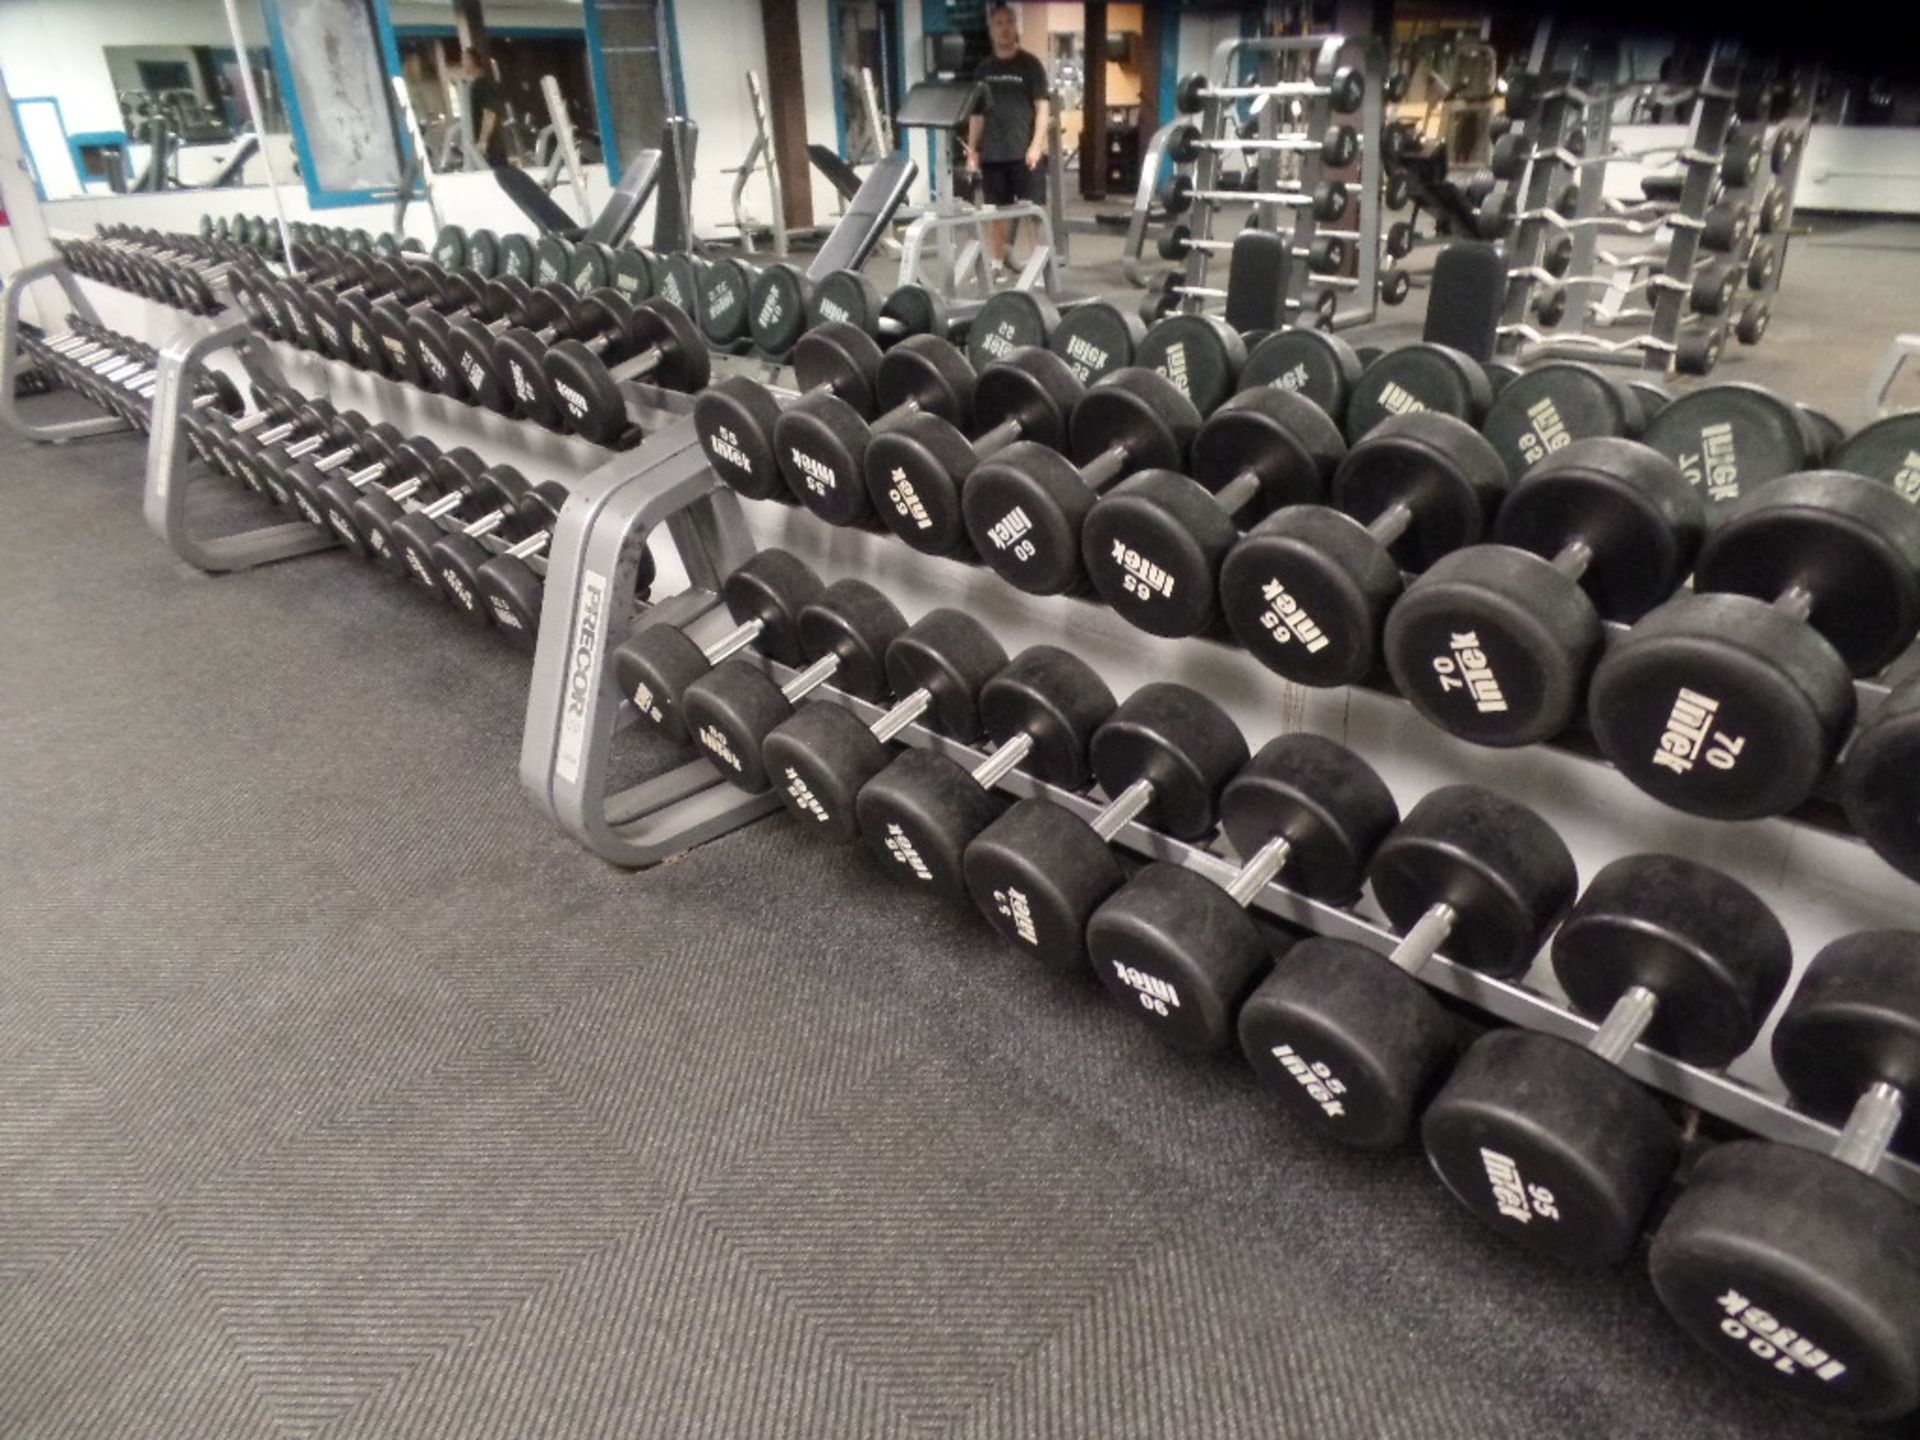 {LOT} 30 Pairs of Dumbbells (5, 7.5, 10, 12.5, 15, 17.5, 20, 22.5, 25, 27.5, 30, 32.5, 35, 37.5, 40,